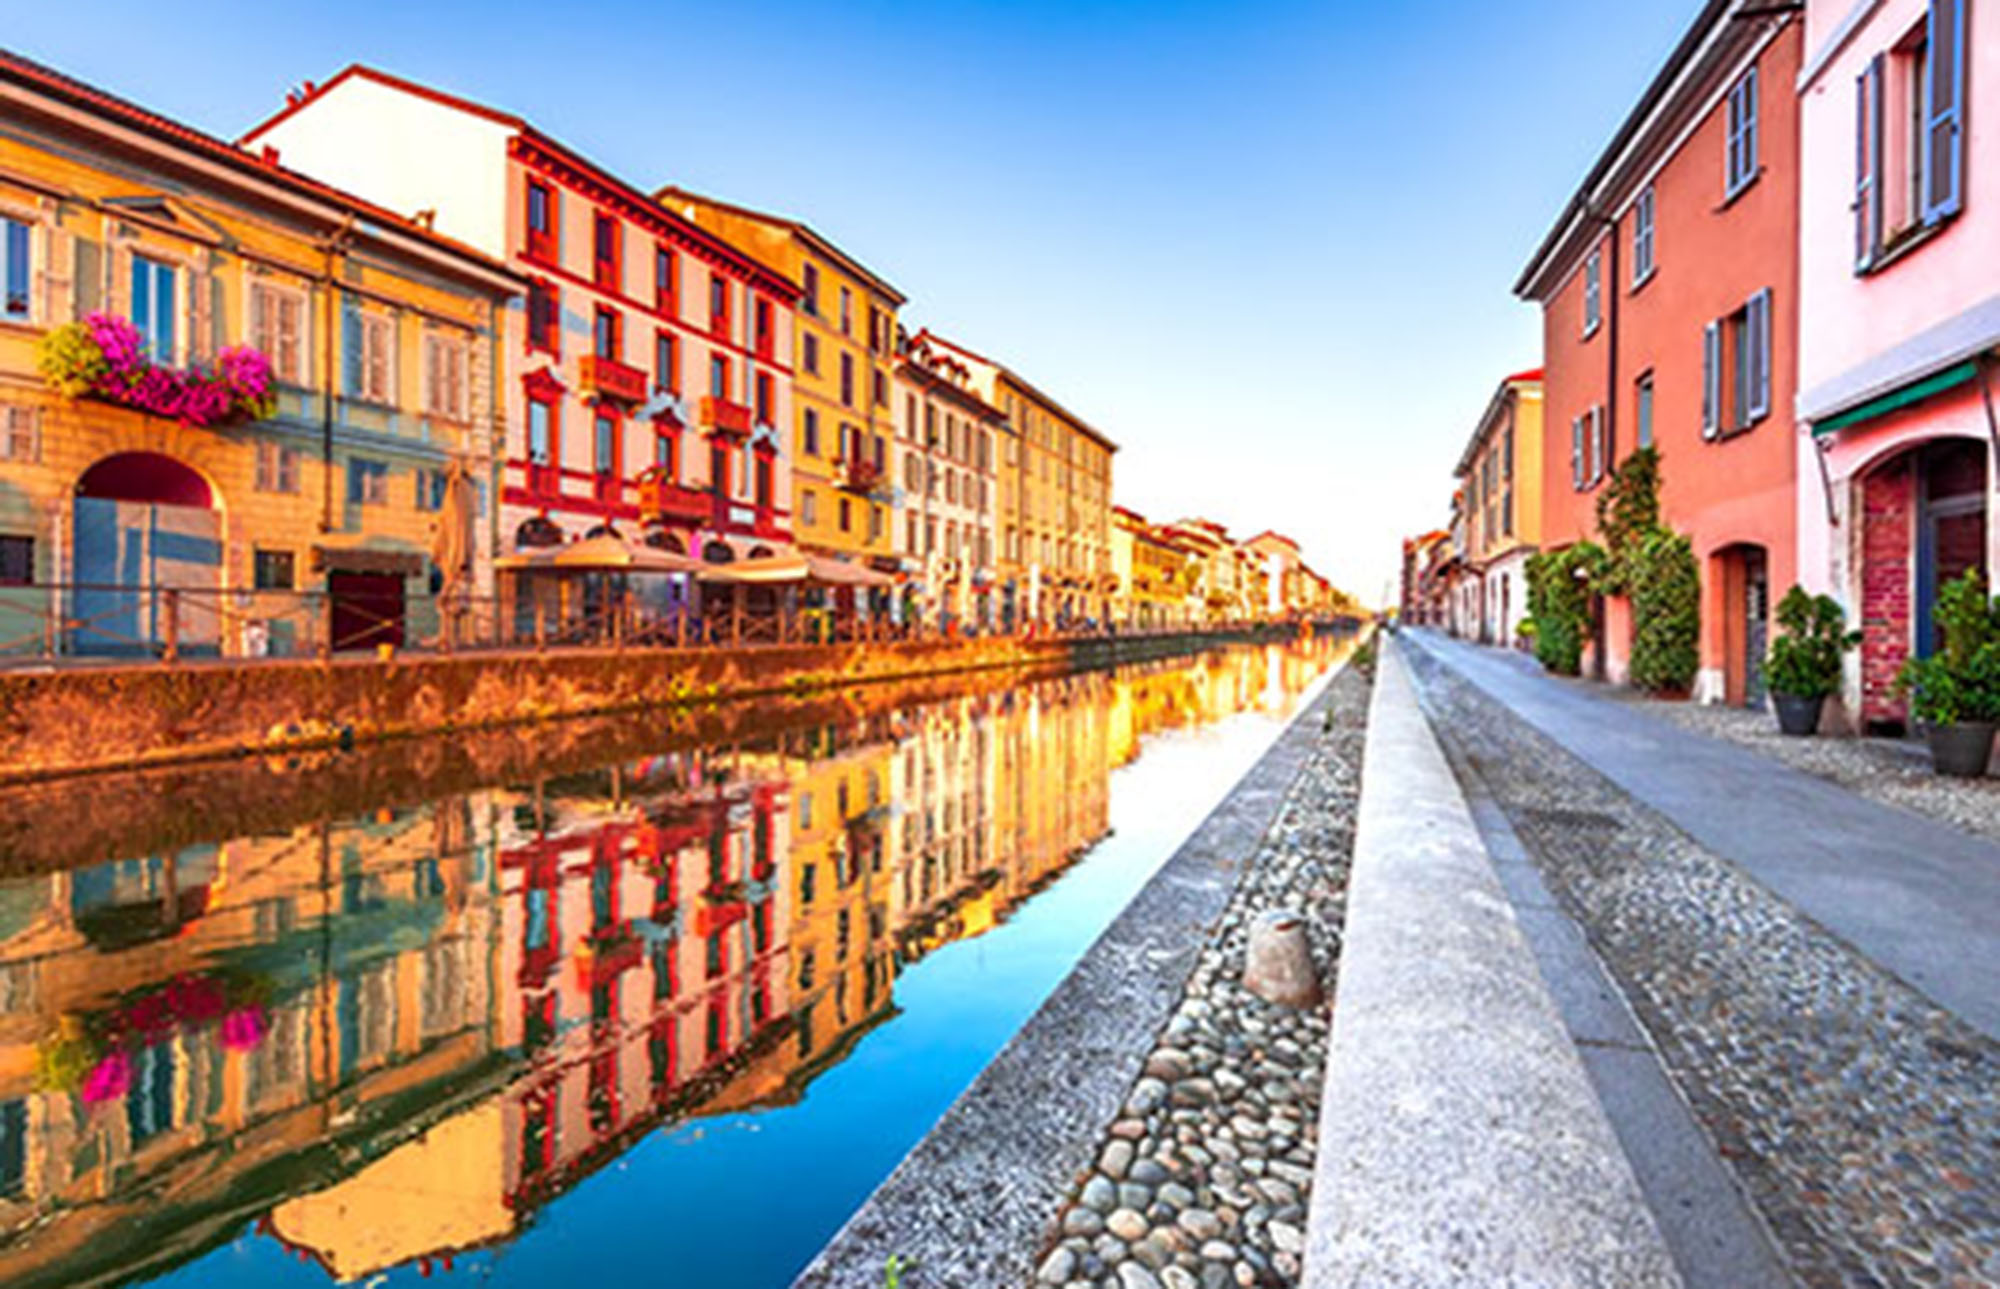 milan italy study abroad waterway in the city